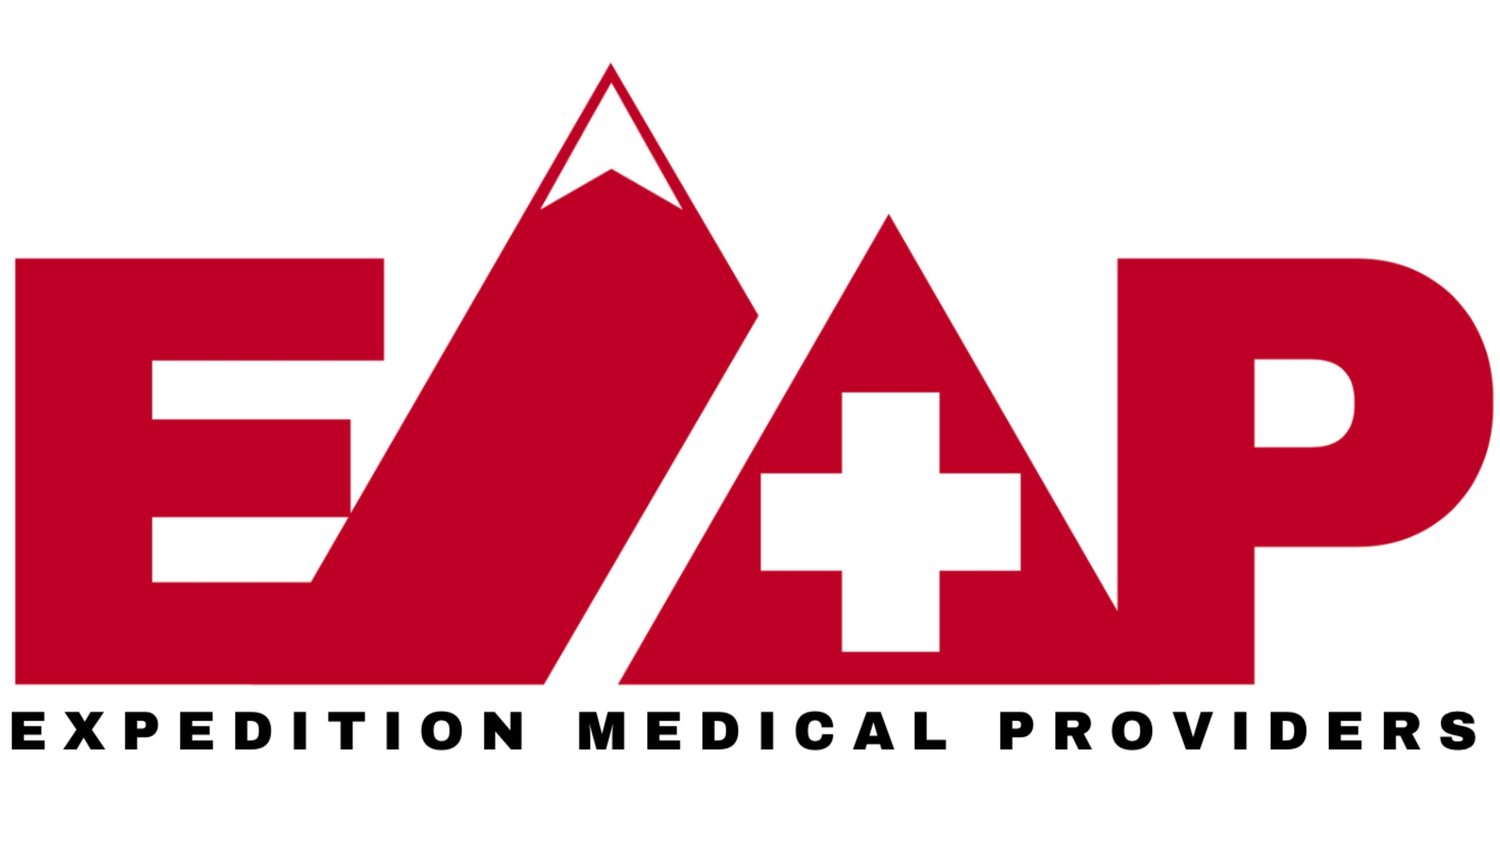 Expedition Medical Providers